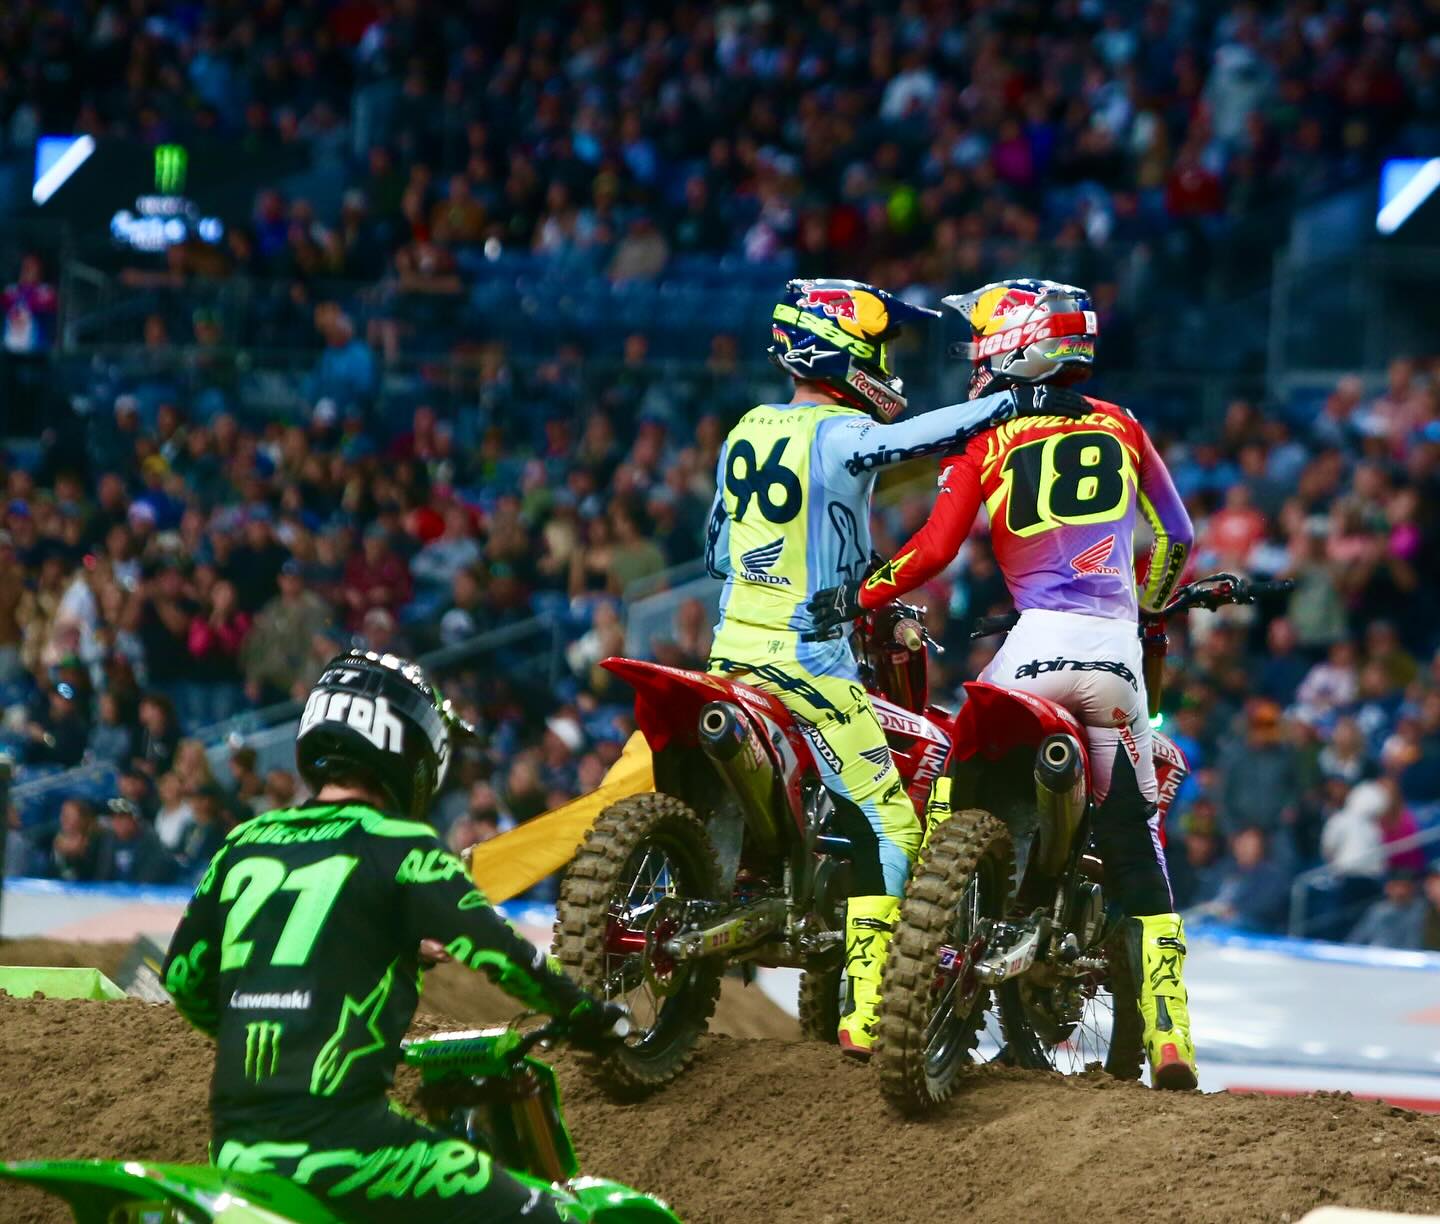 Jett Lawrence Wins Denver Supercross and Lawrence Brothers Make History Finishing 1-2